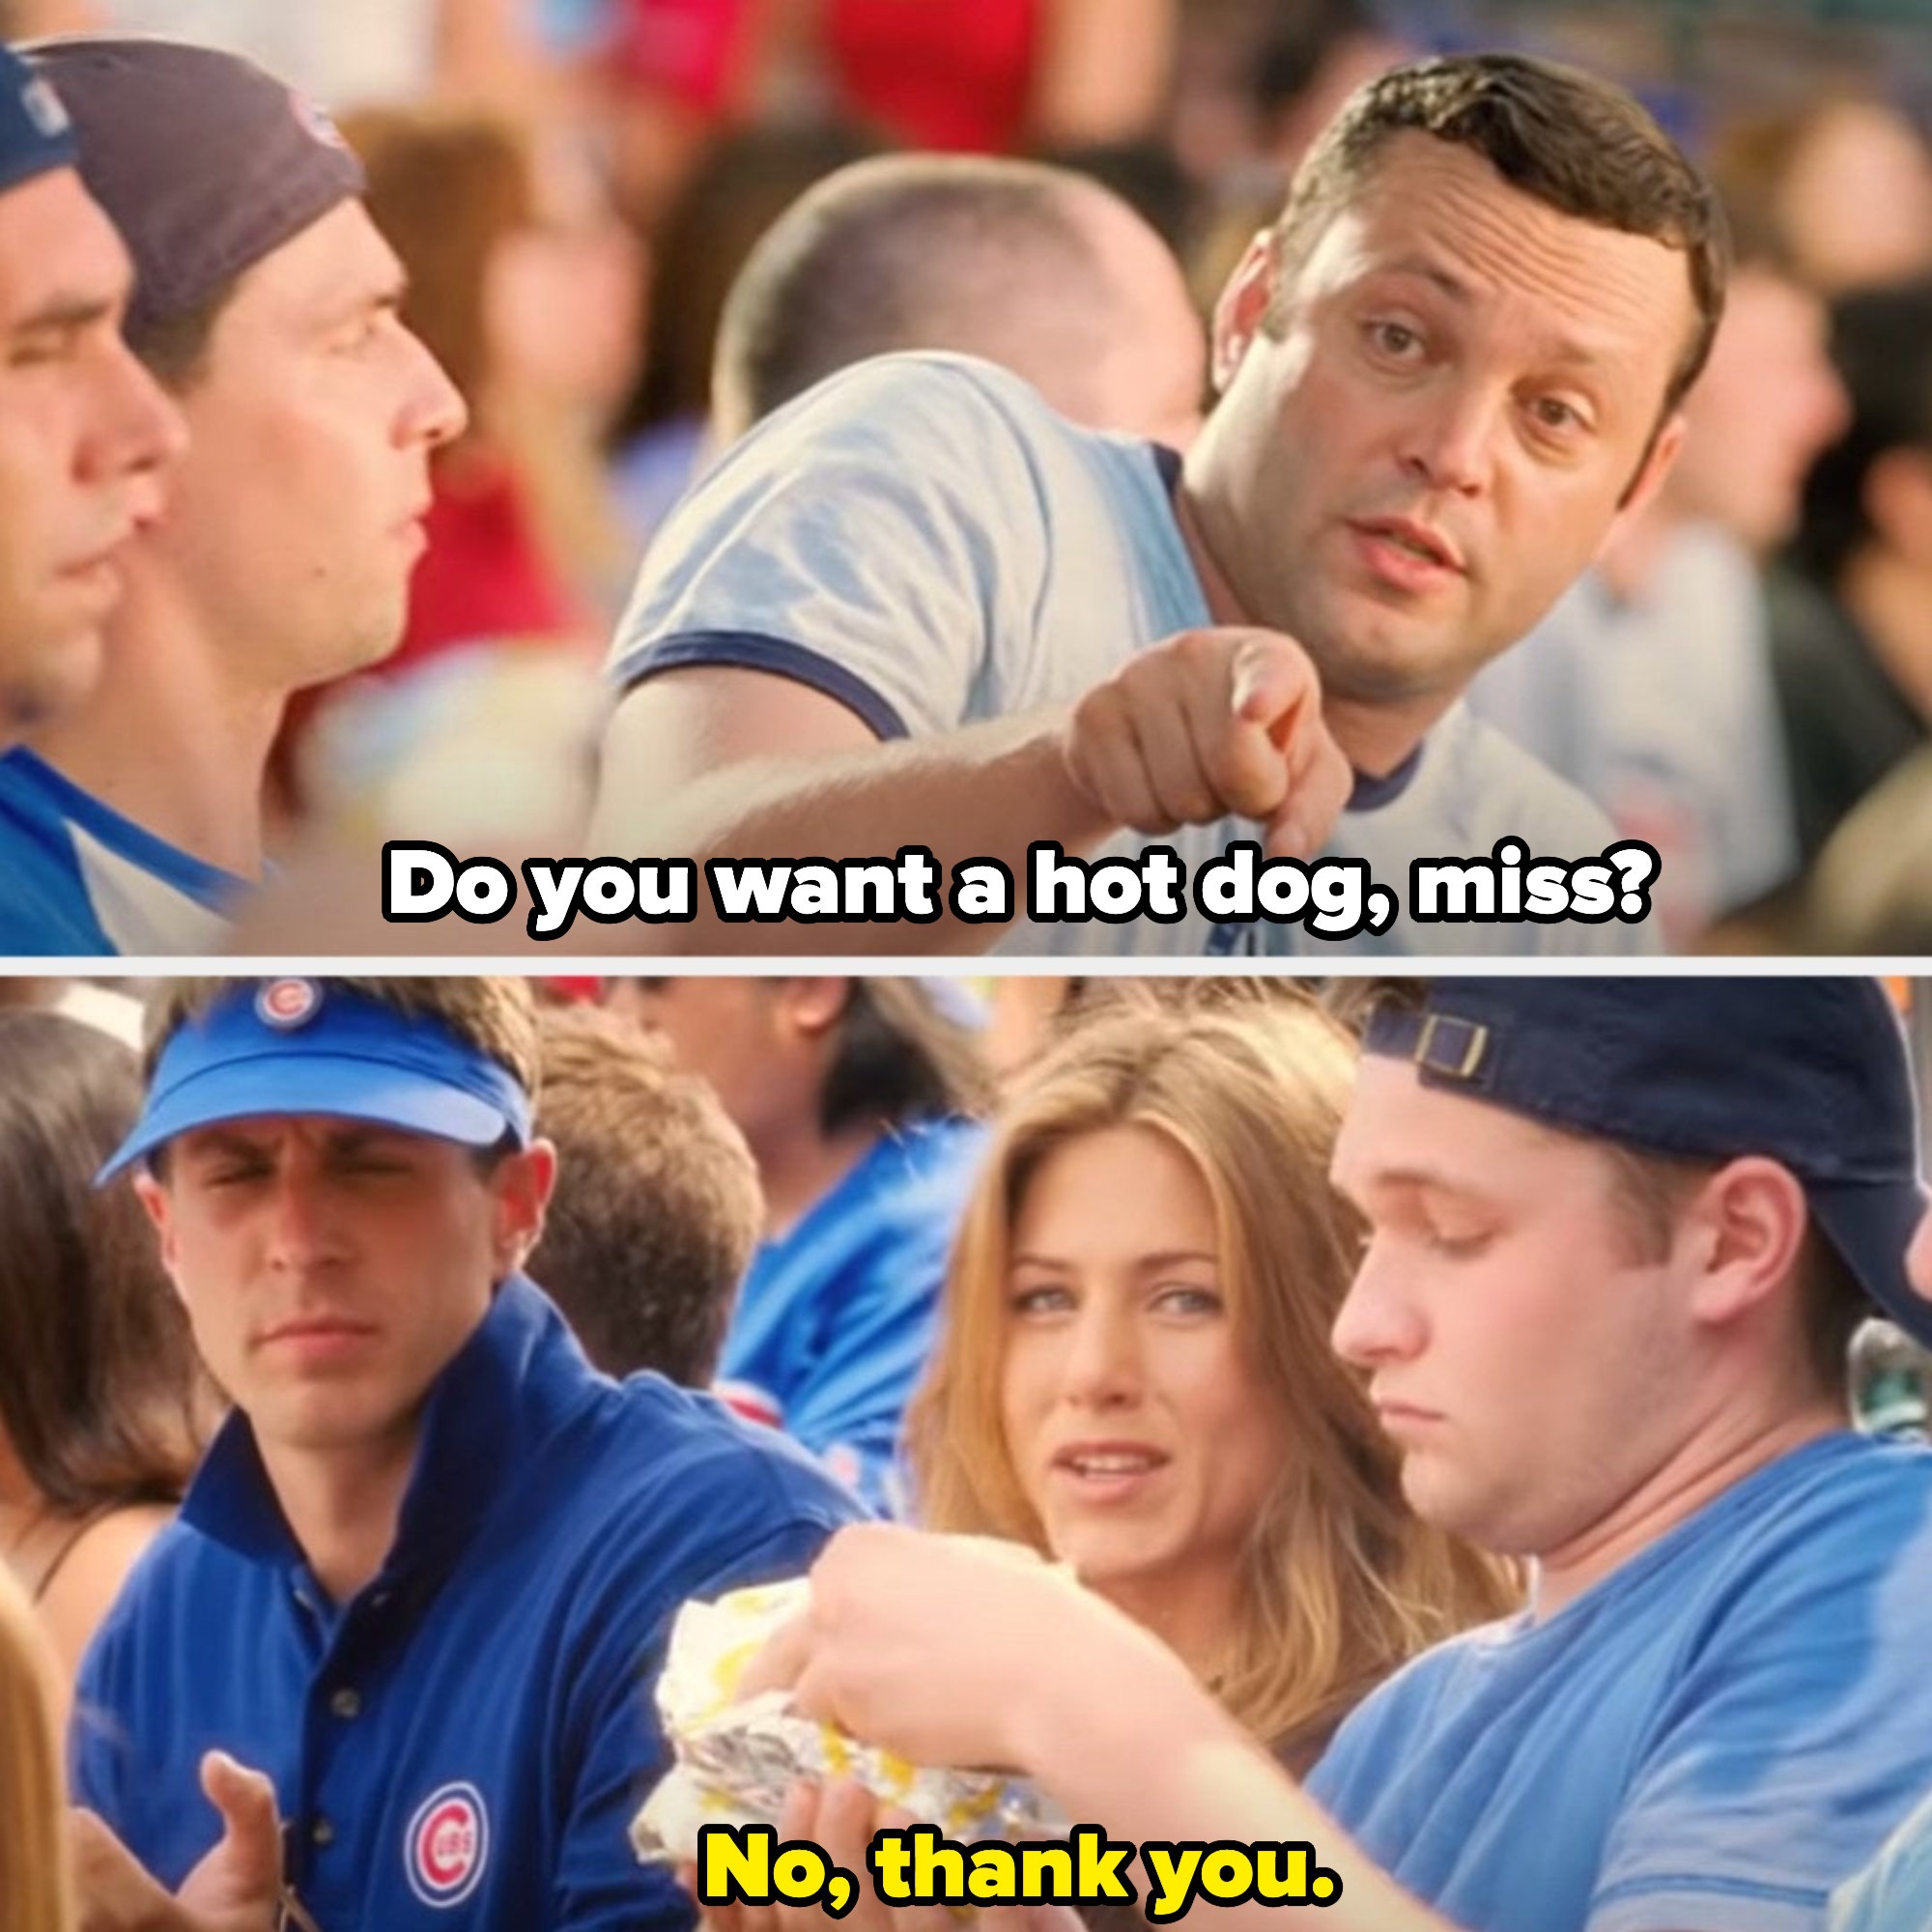 Gary offering Brooke a hot dog at a Chicago Cubs baseball game